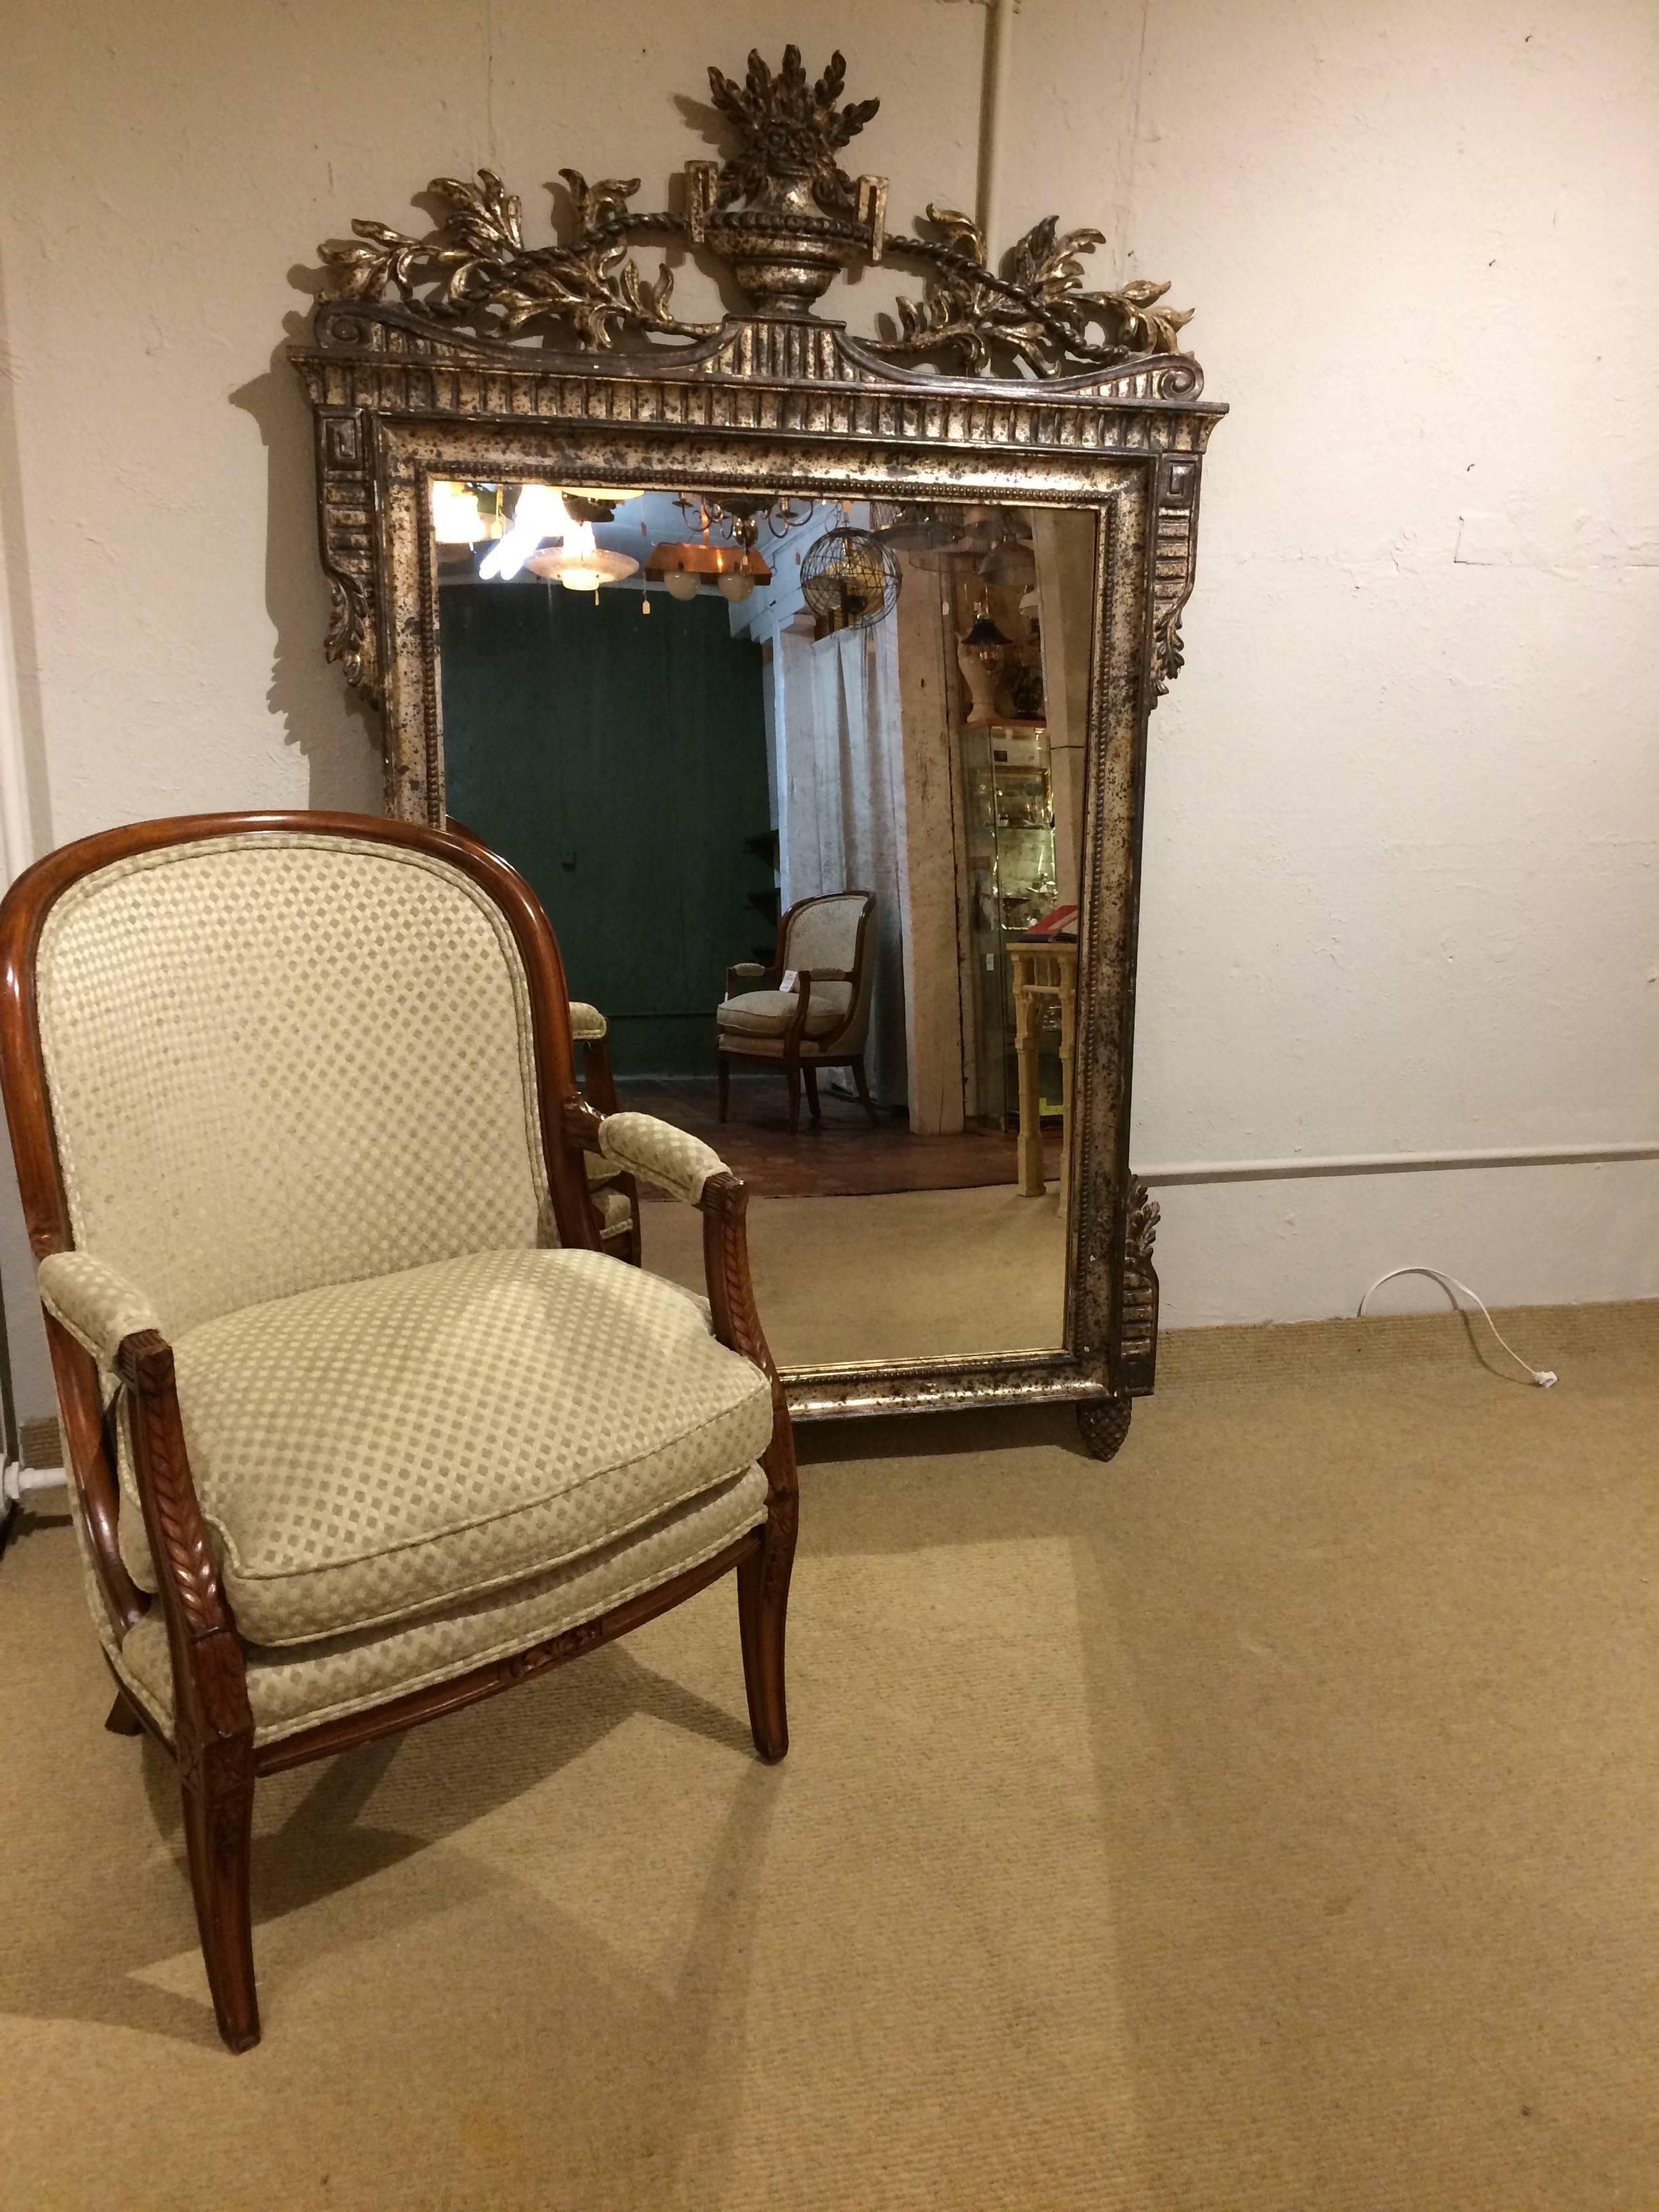 Magnificent and very large silver gilt neoclassical mirror having original aged mirror with subtle ghosting.